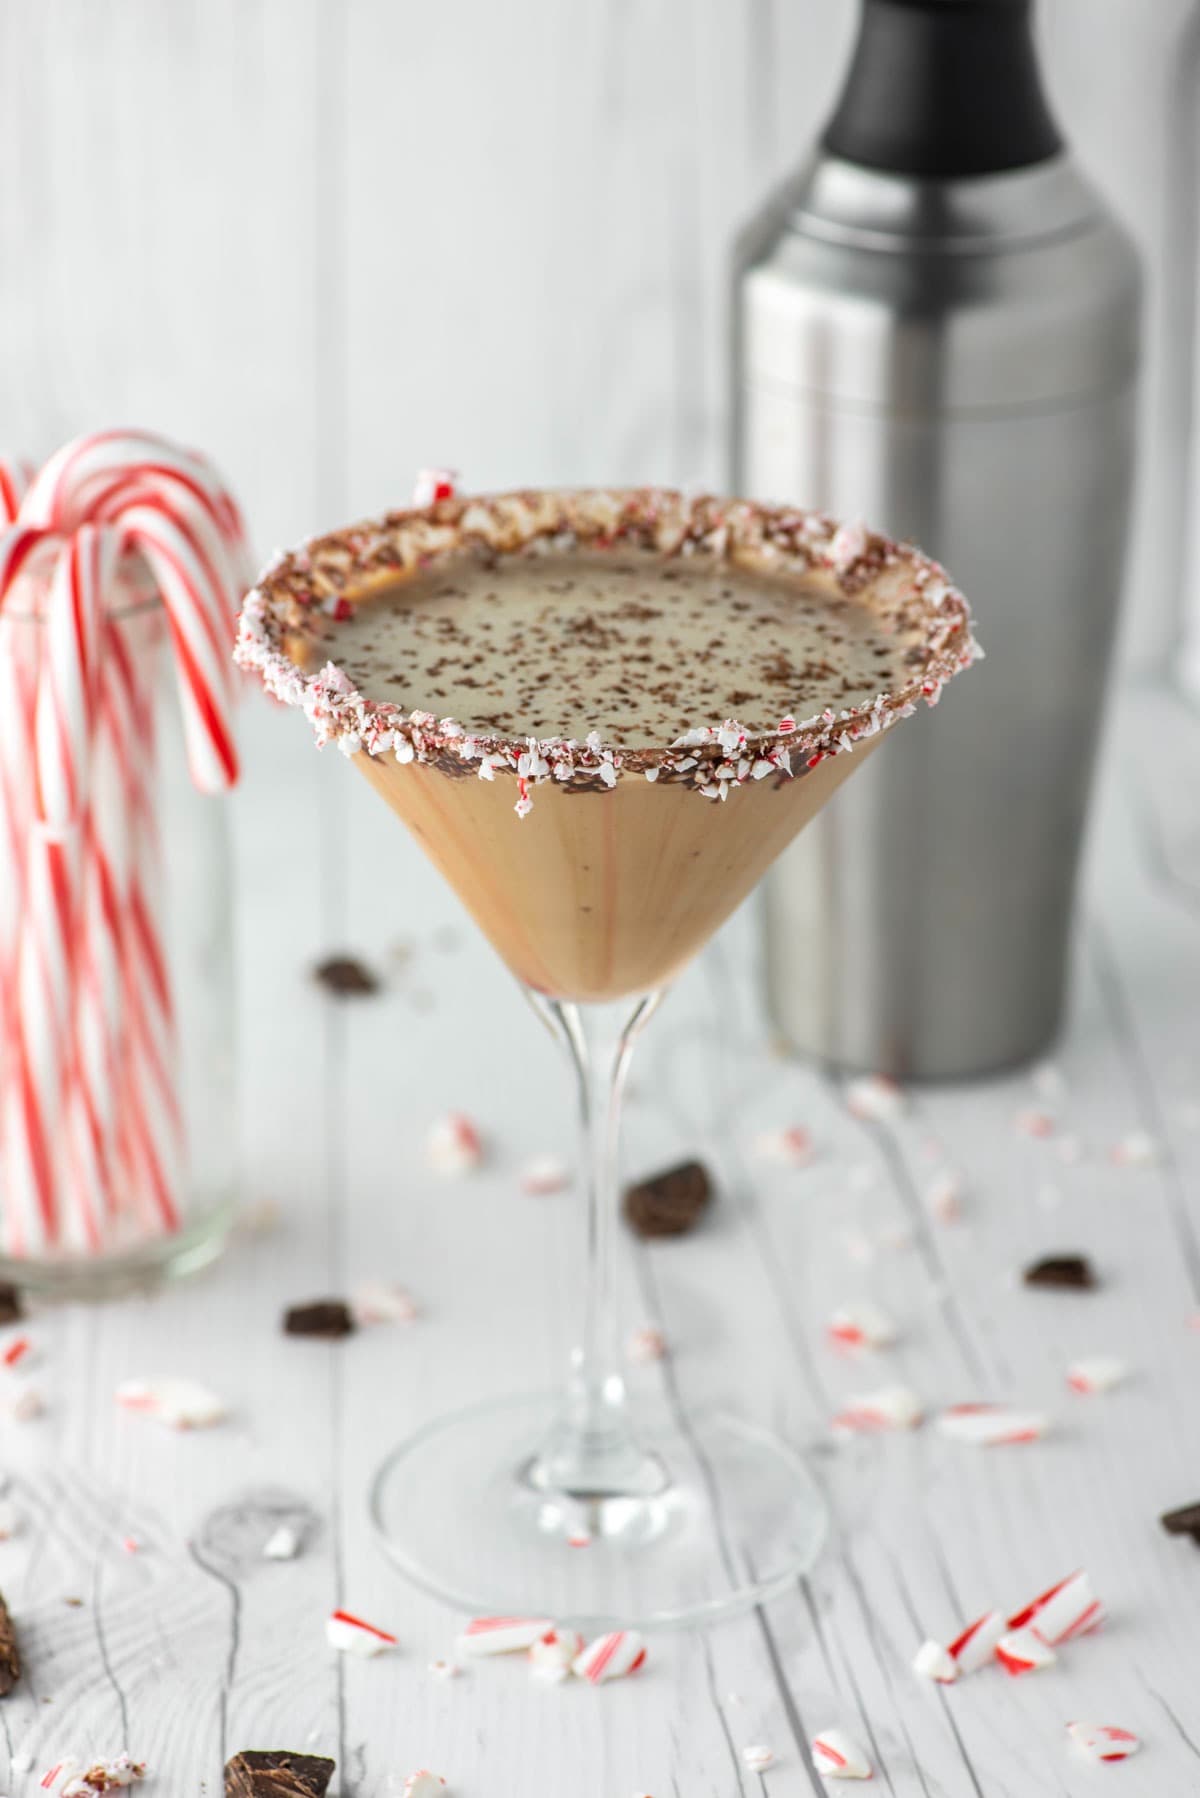 A festive martini with peppermint syrup and candy canes.